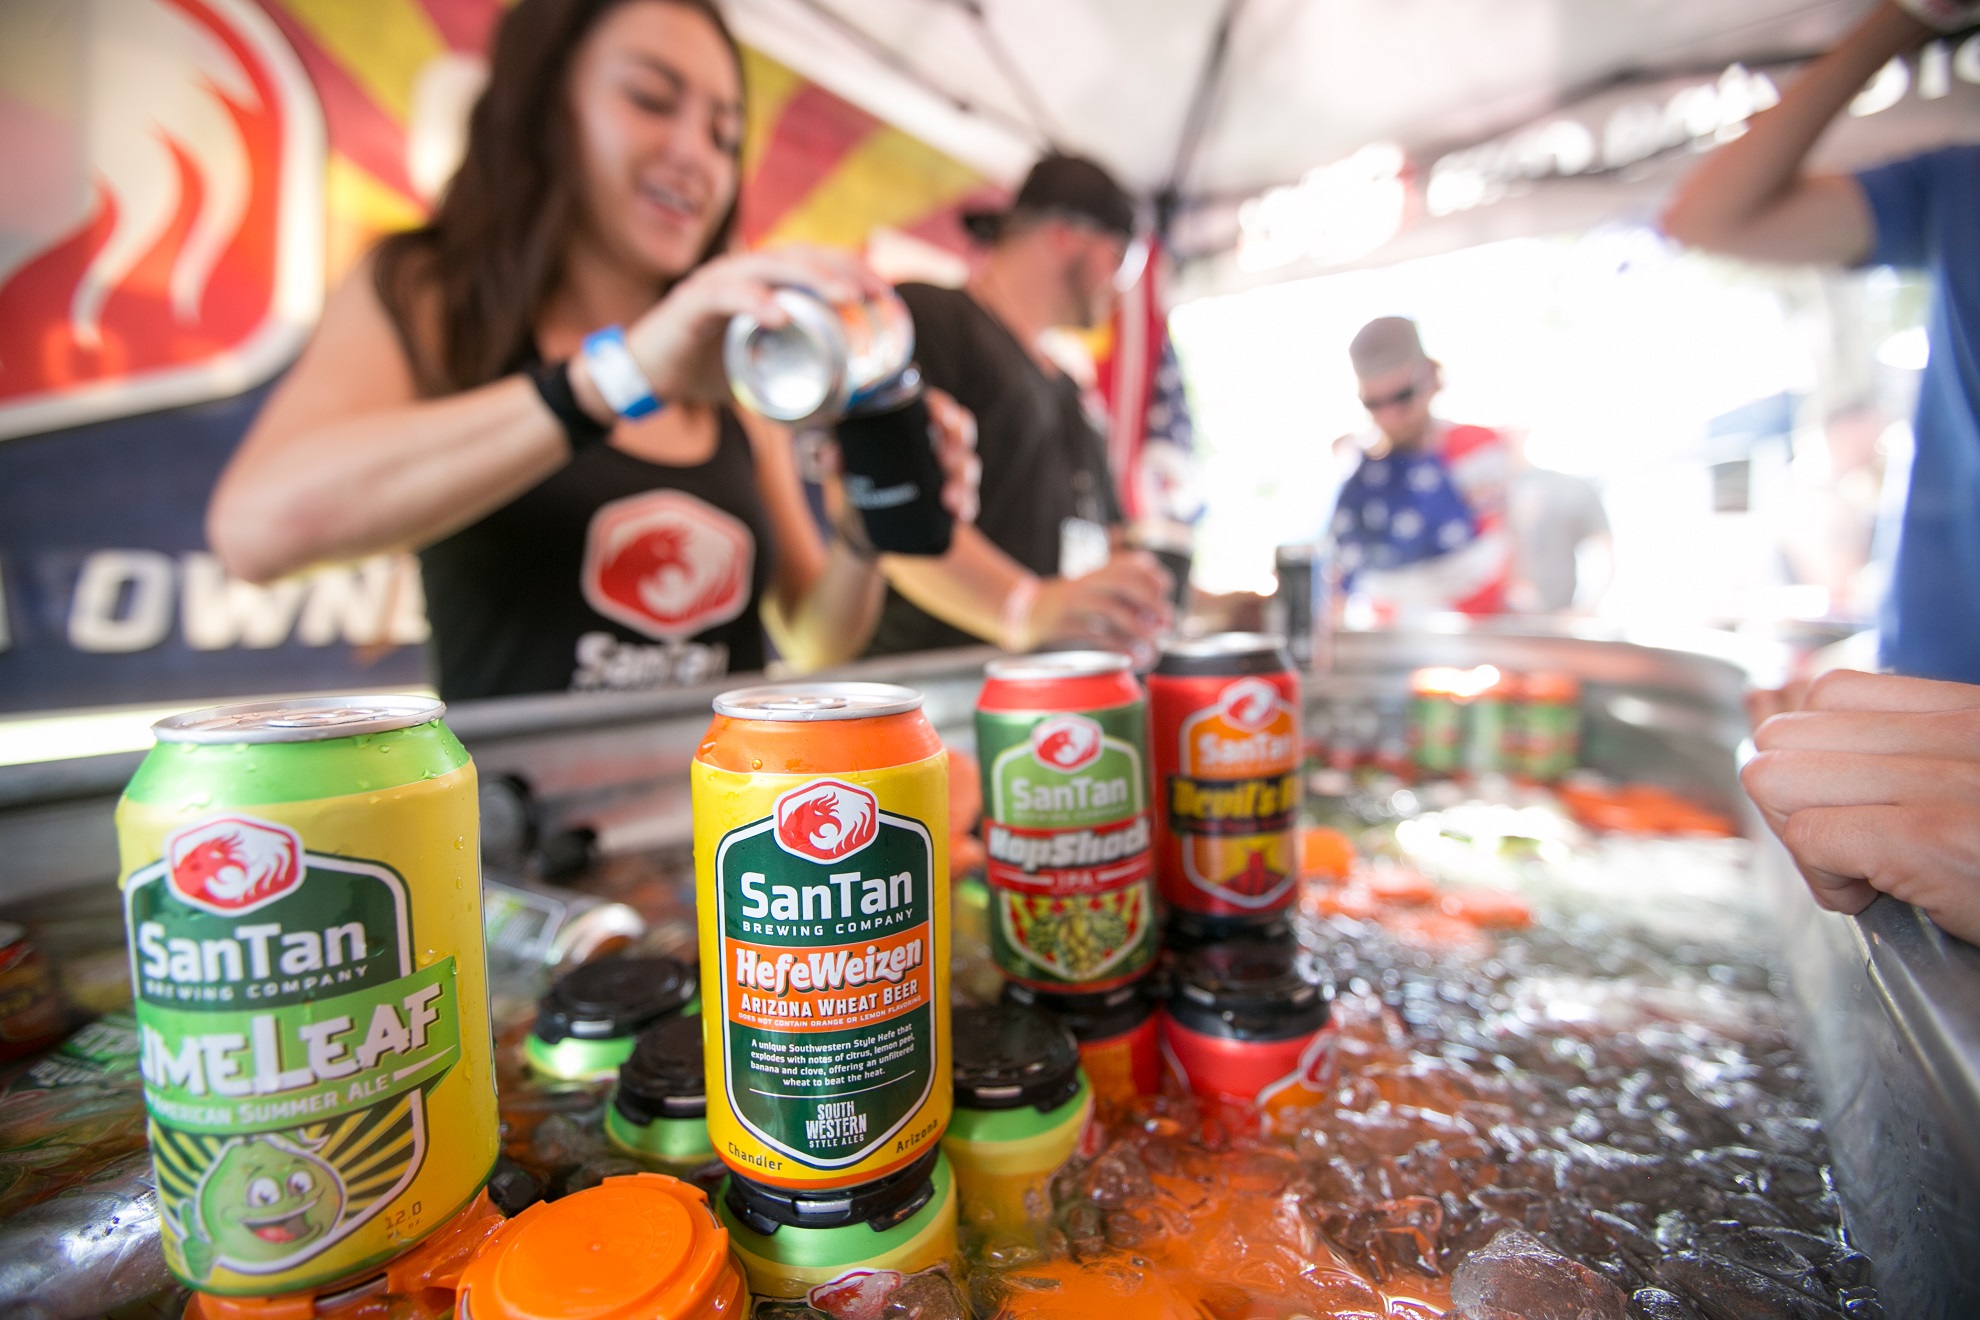 Canned Craft Beer Festival